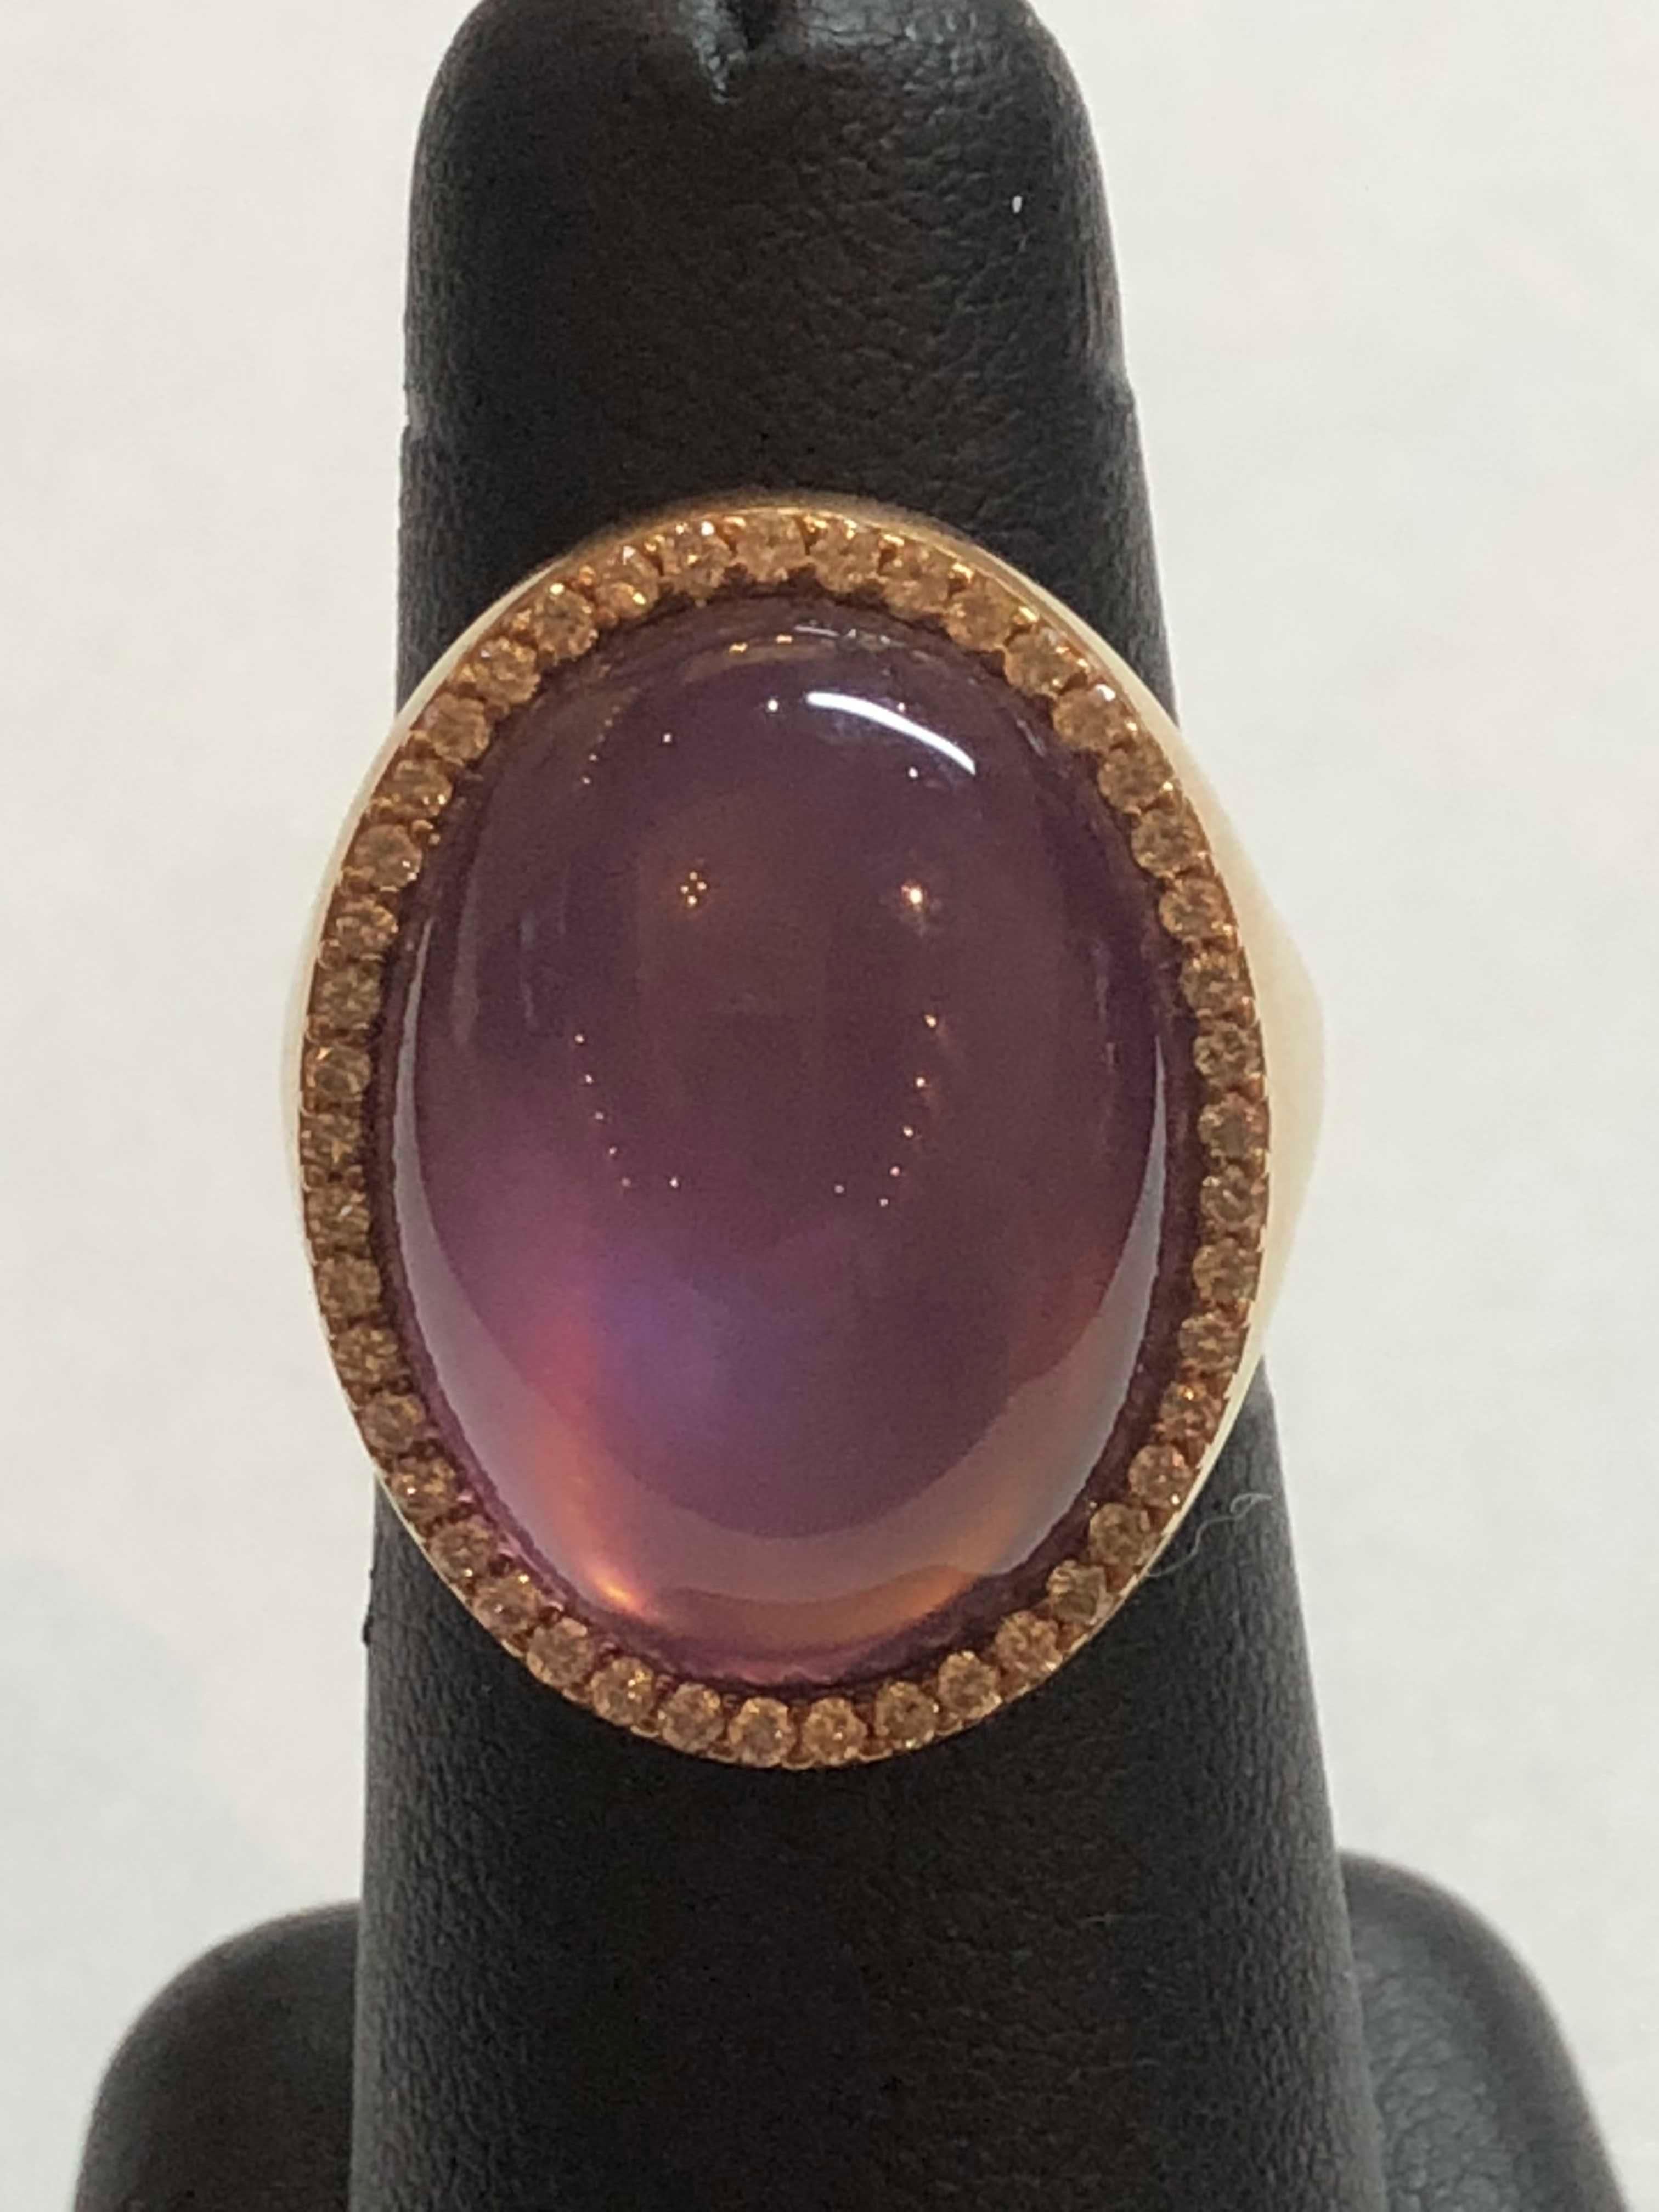 Beautiful Roberto Coin Ring 18k yellow gold with 0.42 cts of G color VS diamonds and a wonderful Lavender Amethyst      A truly stunning piece in excellent condition.